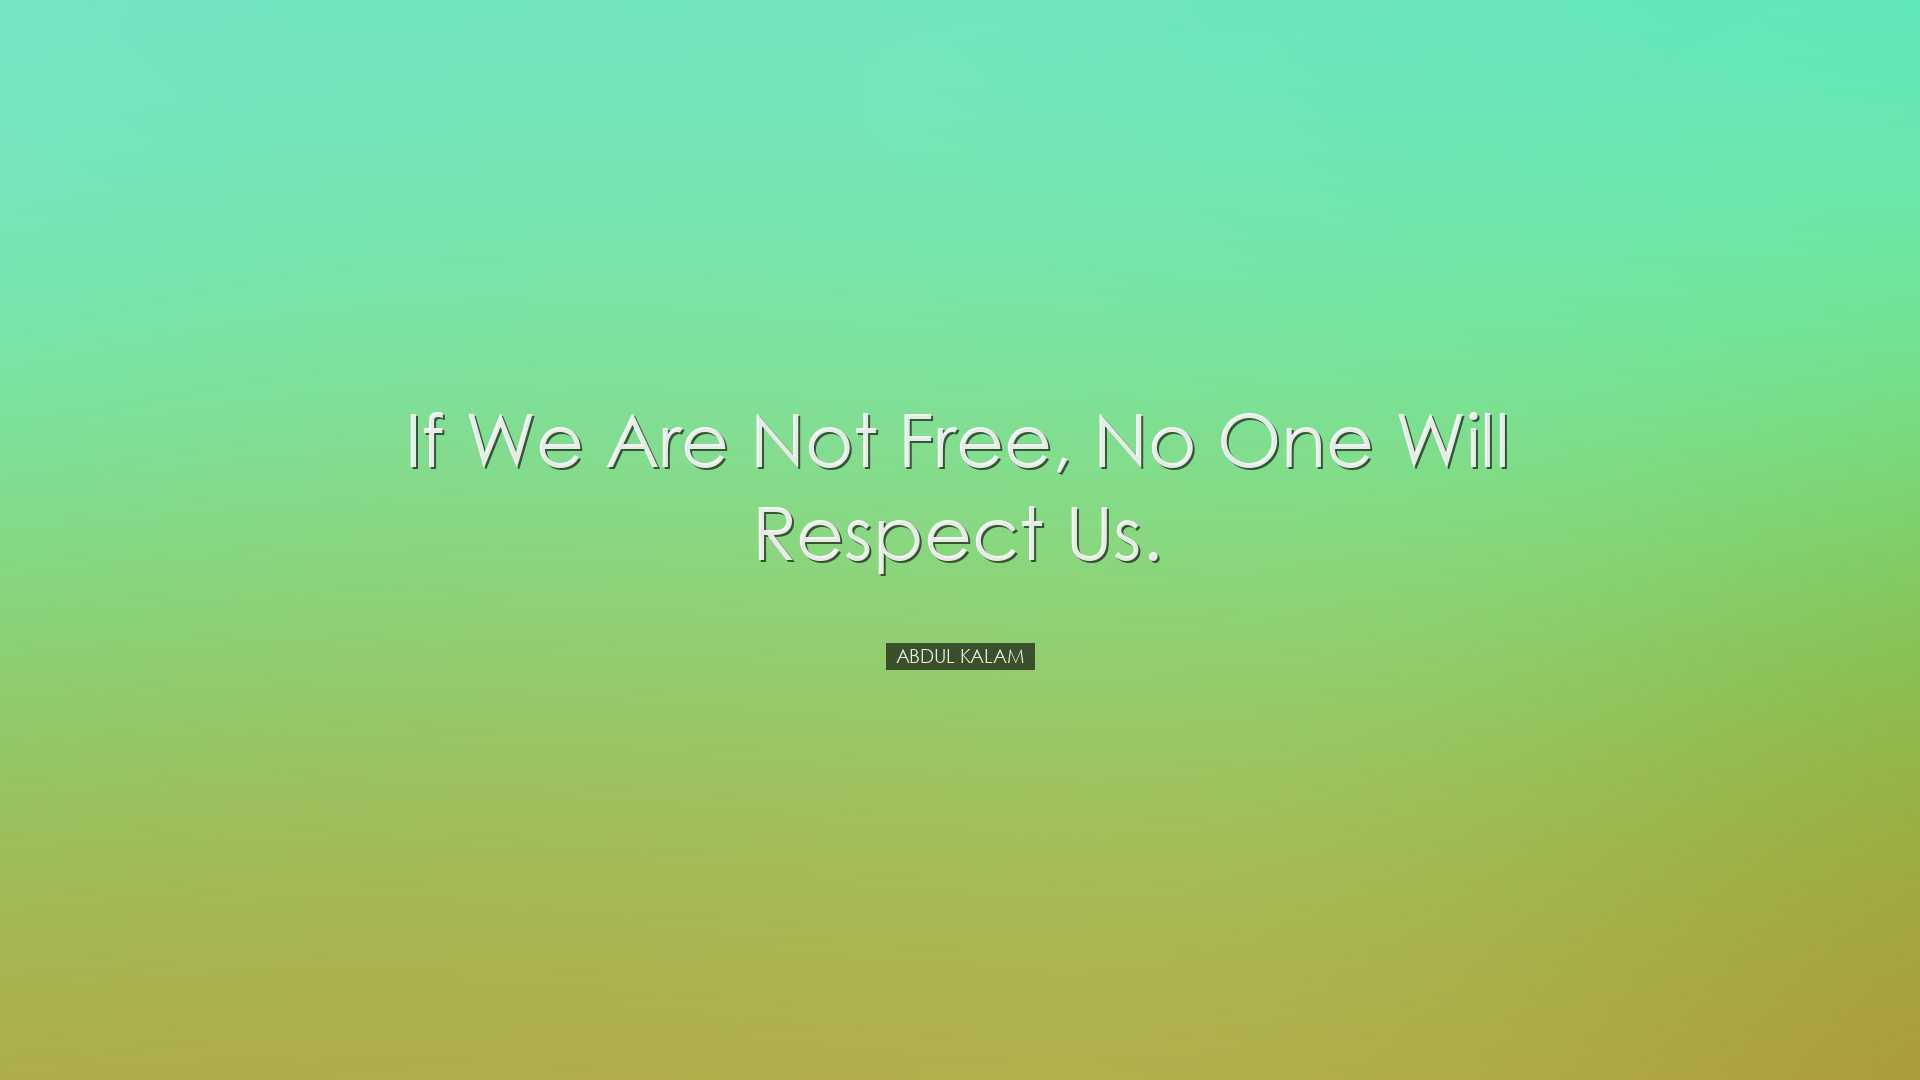 If we are not free, no one will respect us. - Abdul Kalam